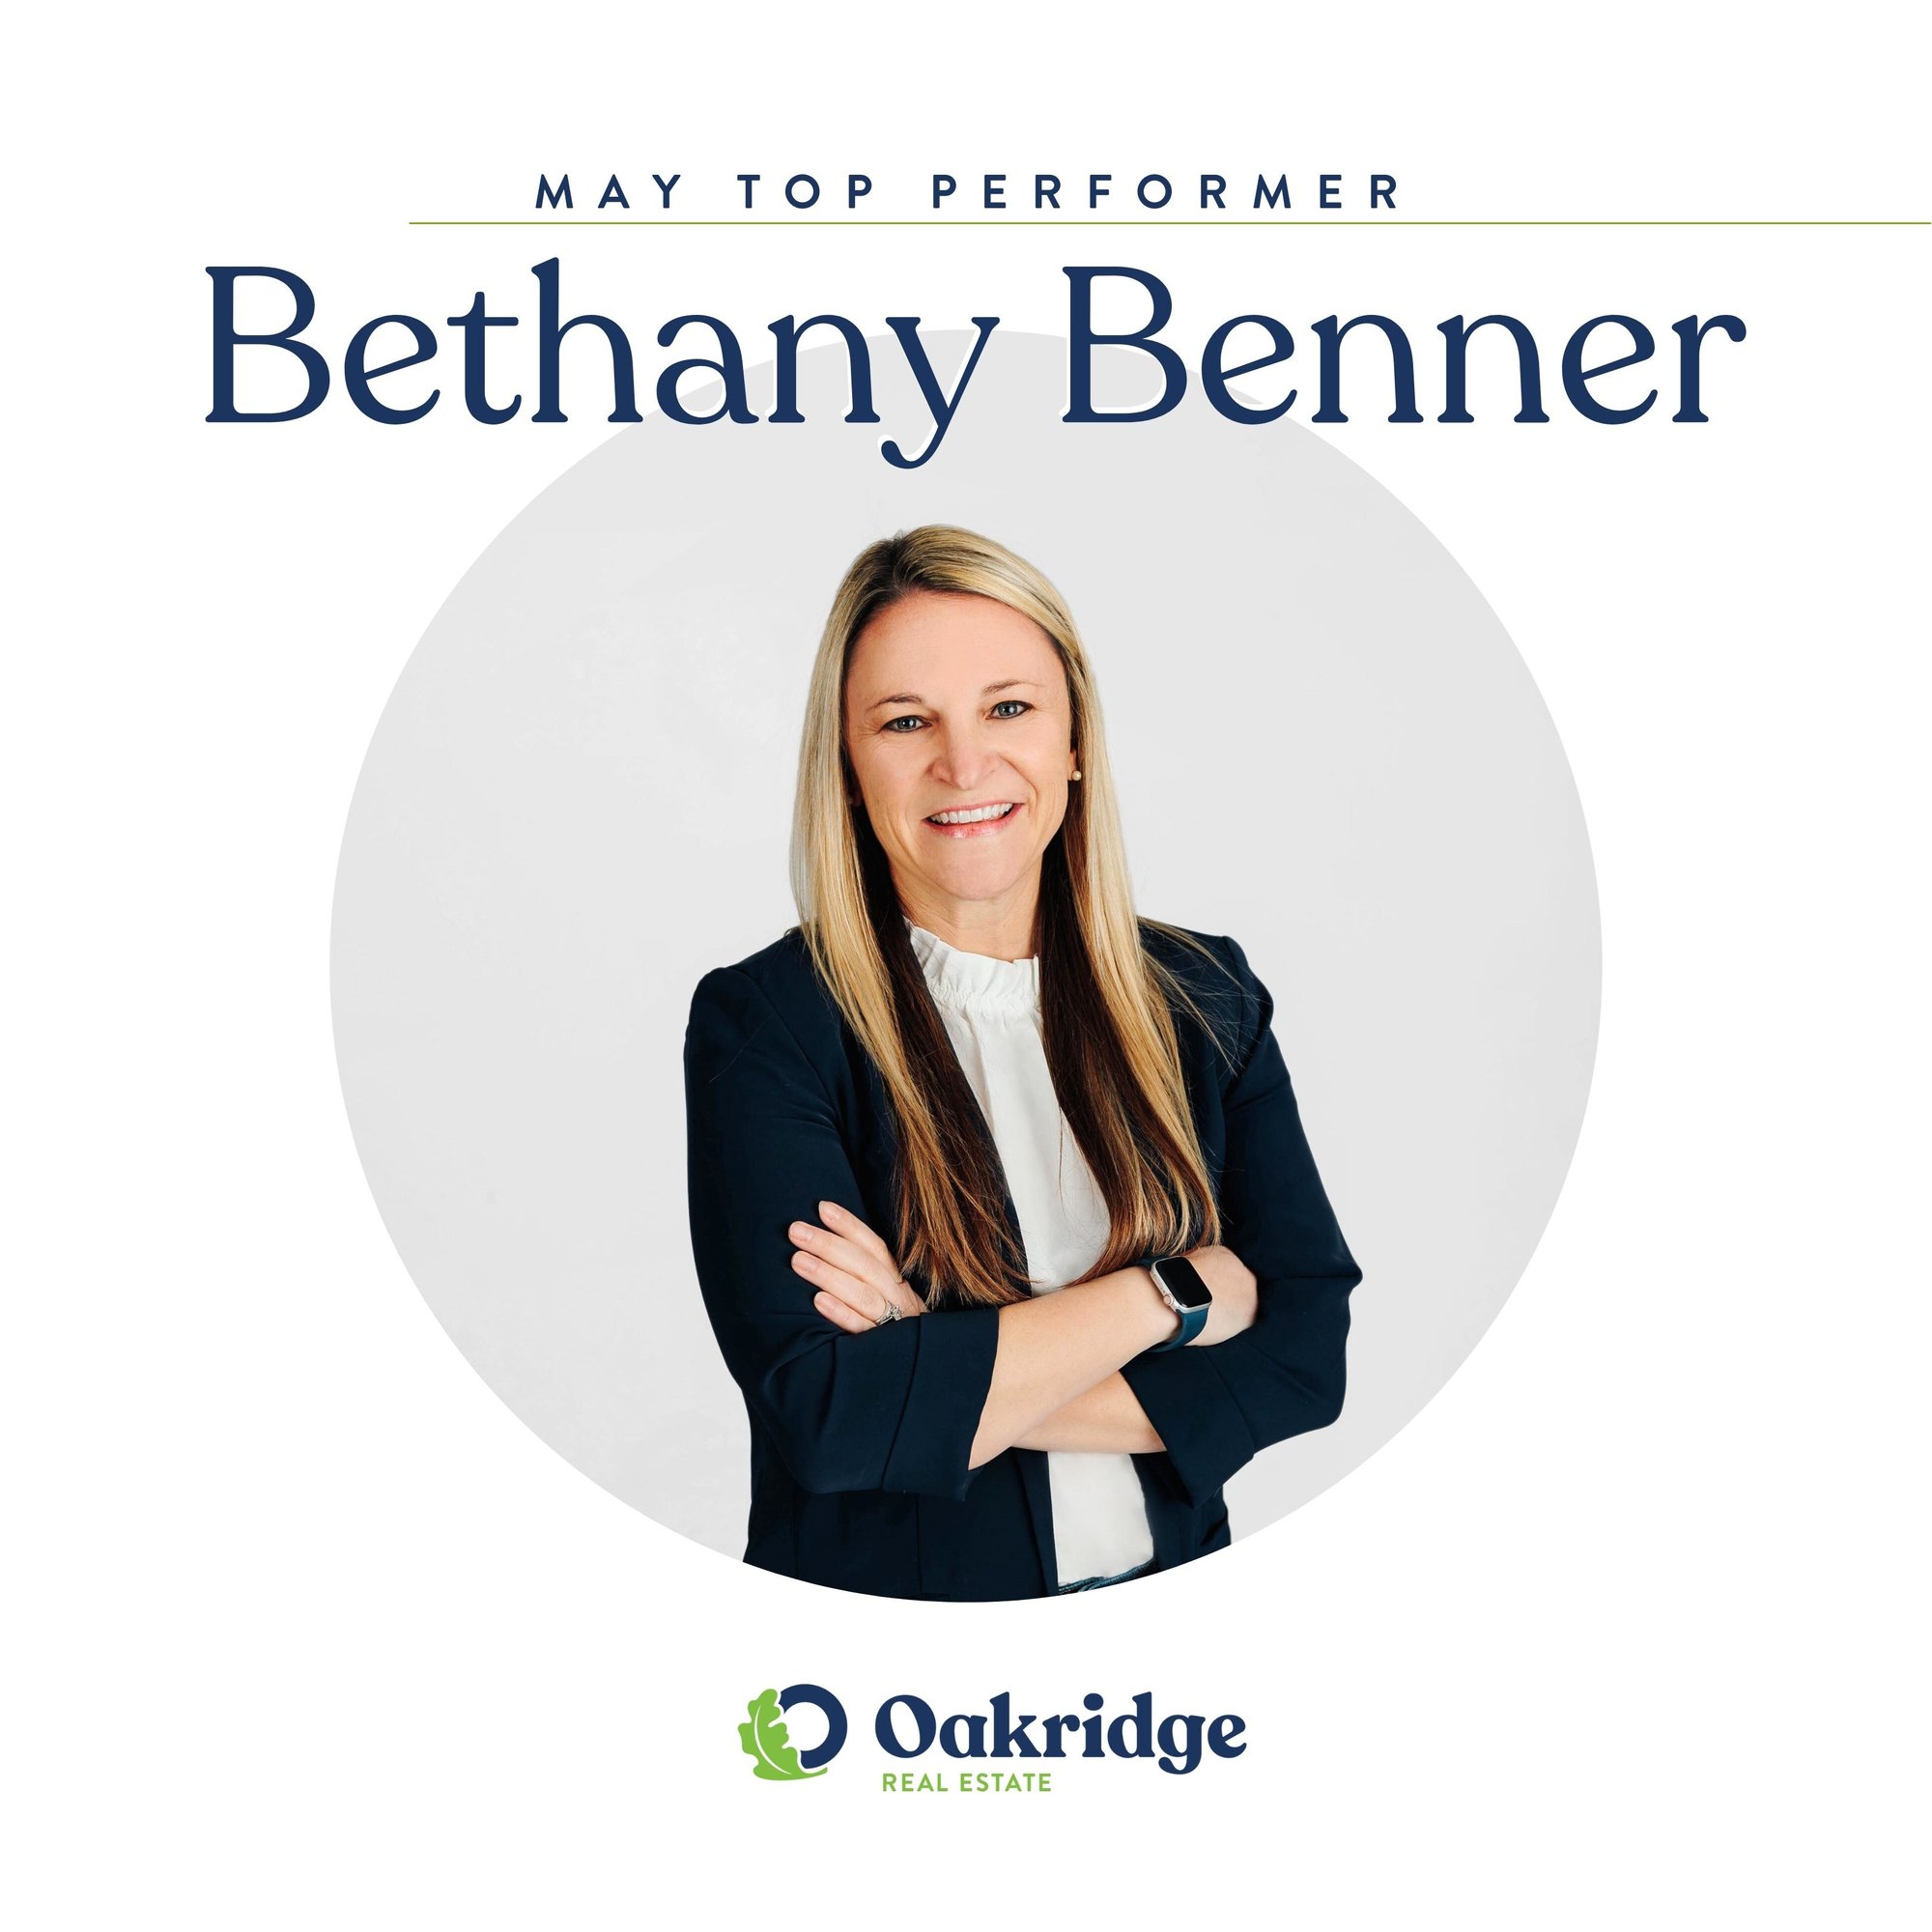 Bethany Benner May Top Performer Oakridge Real Estate